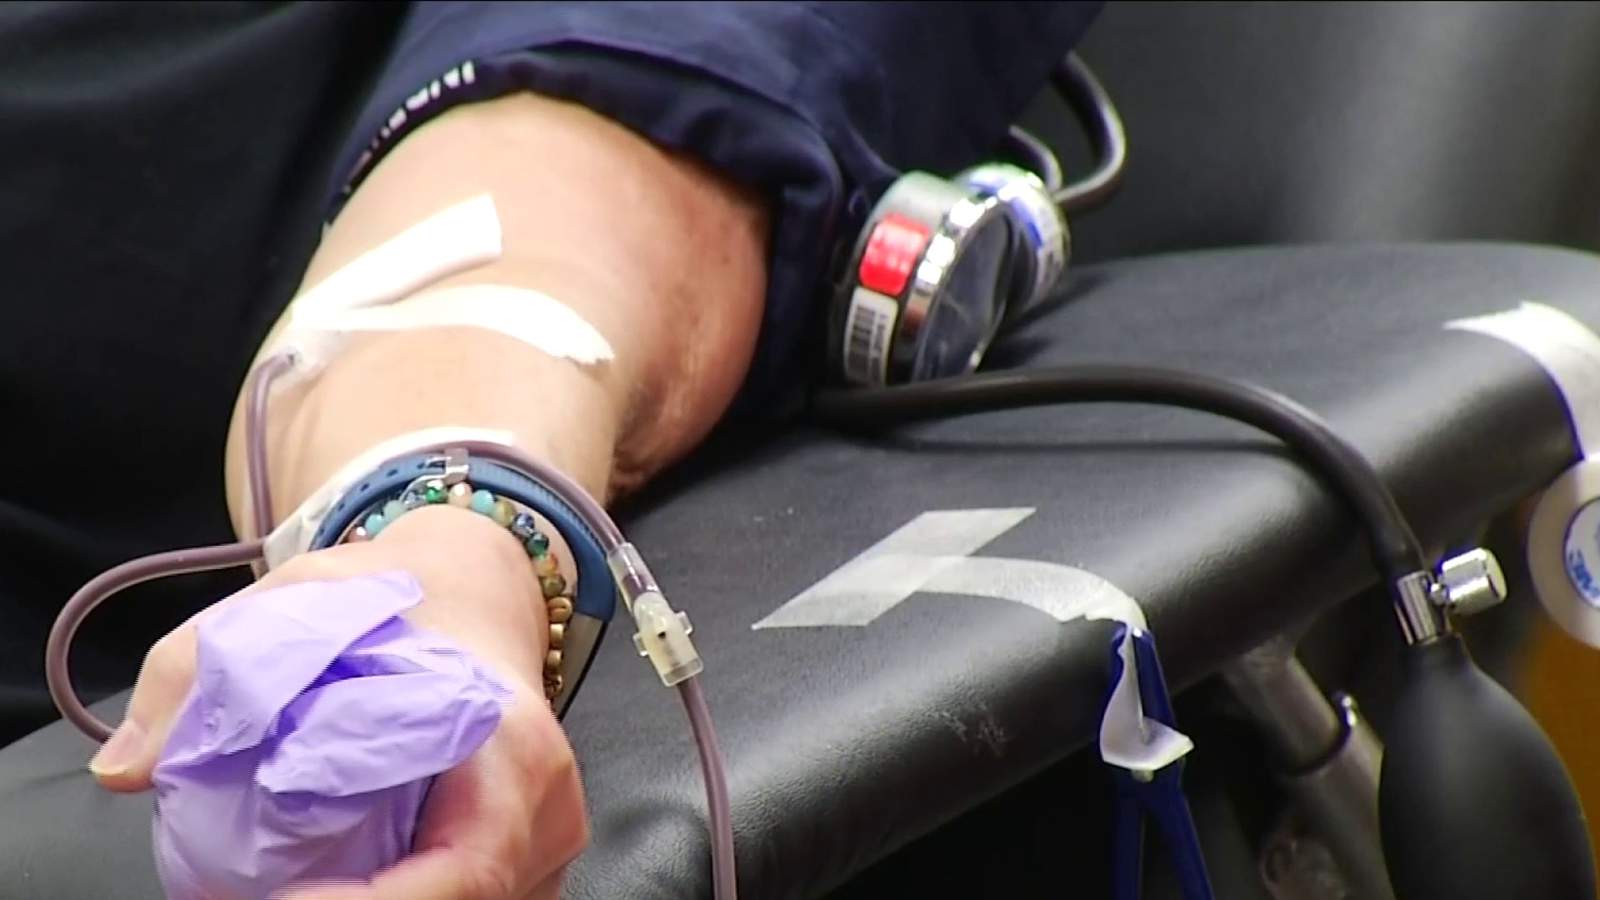 Blood, plasma donations needed as COVID-19 pandemic continues